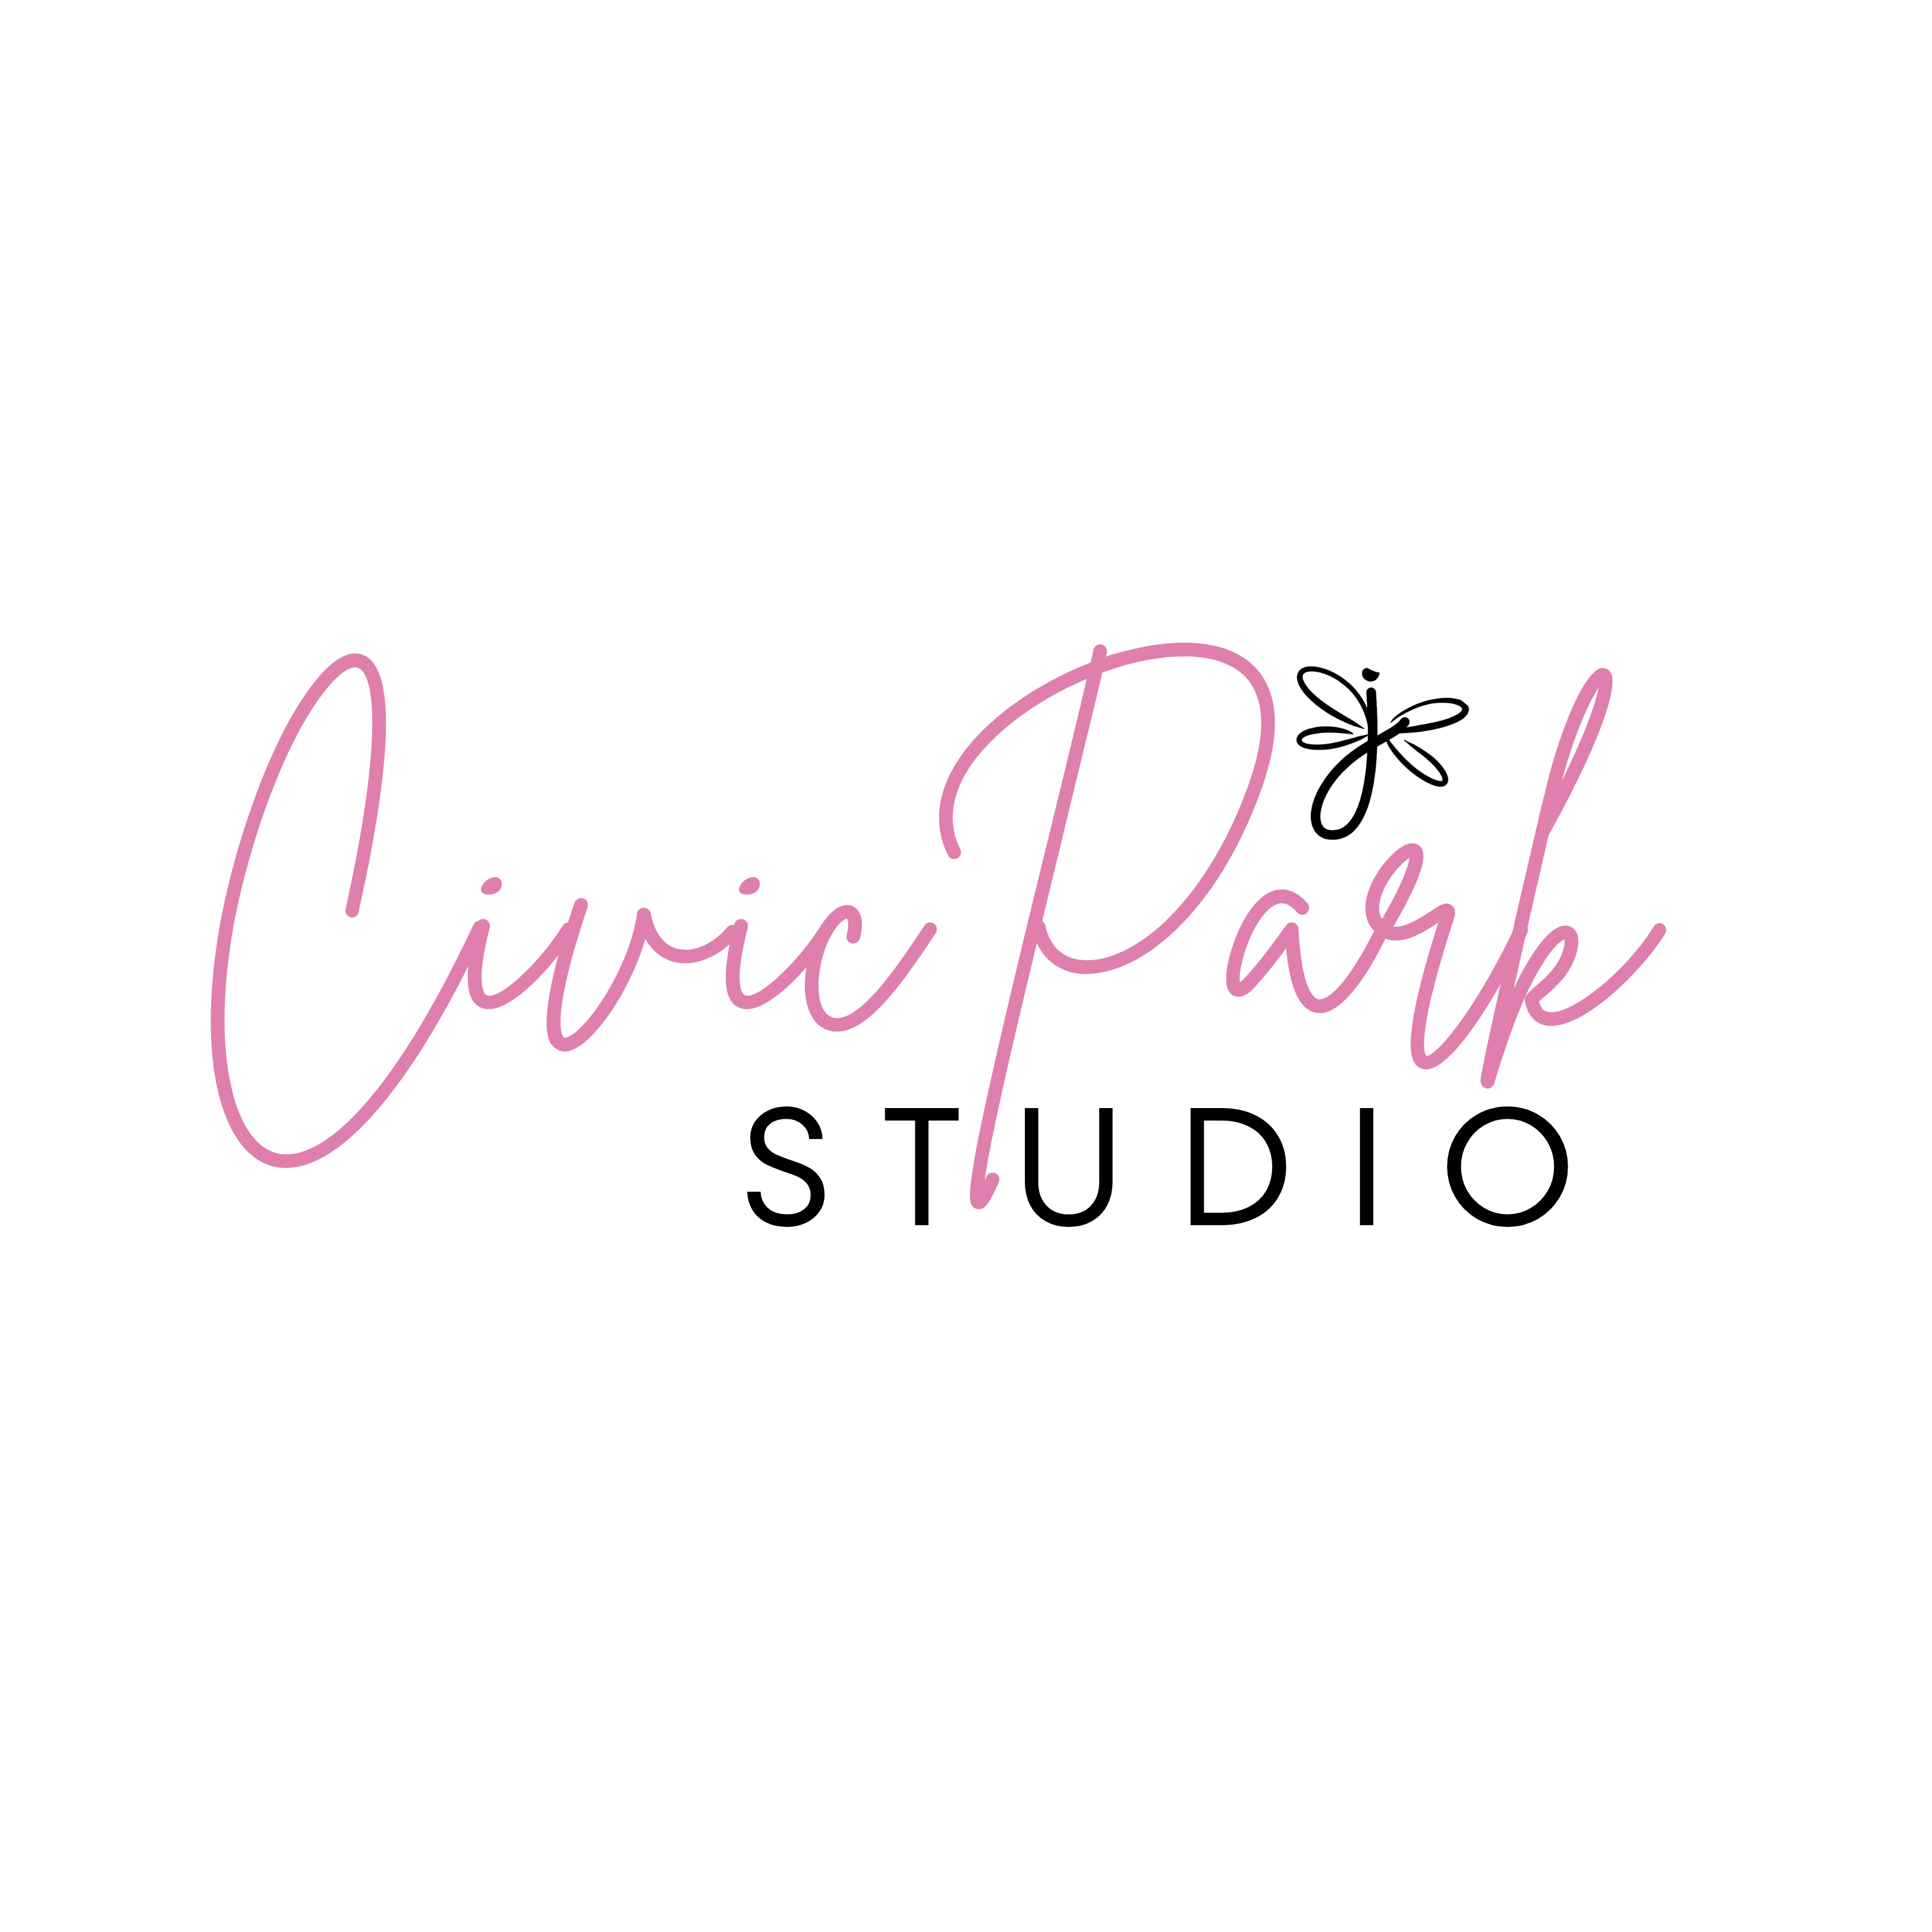 "Civic Park Studio" with a lowercase "j" with butterfly wings above it